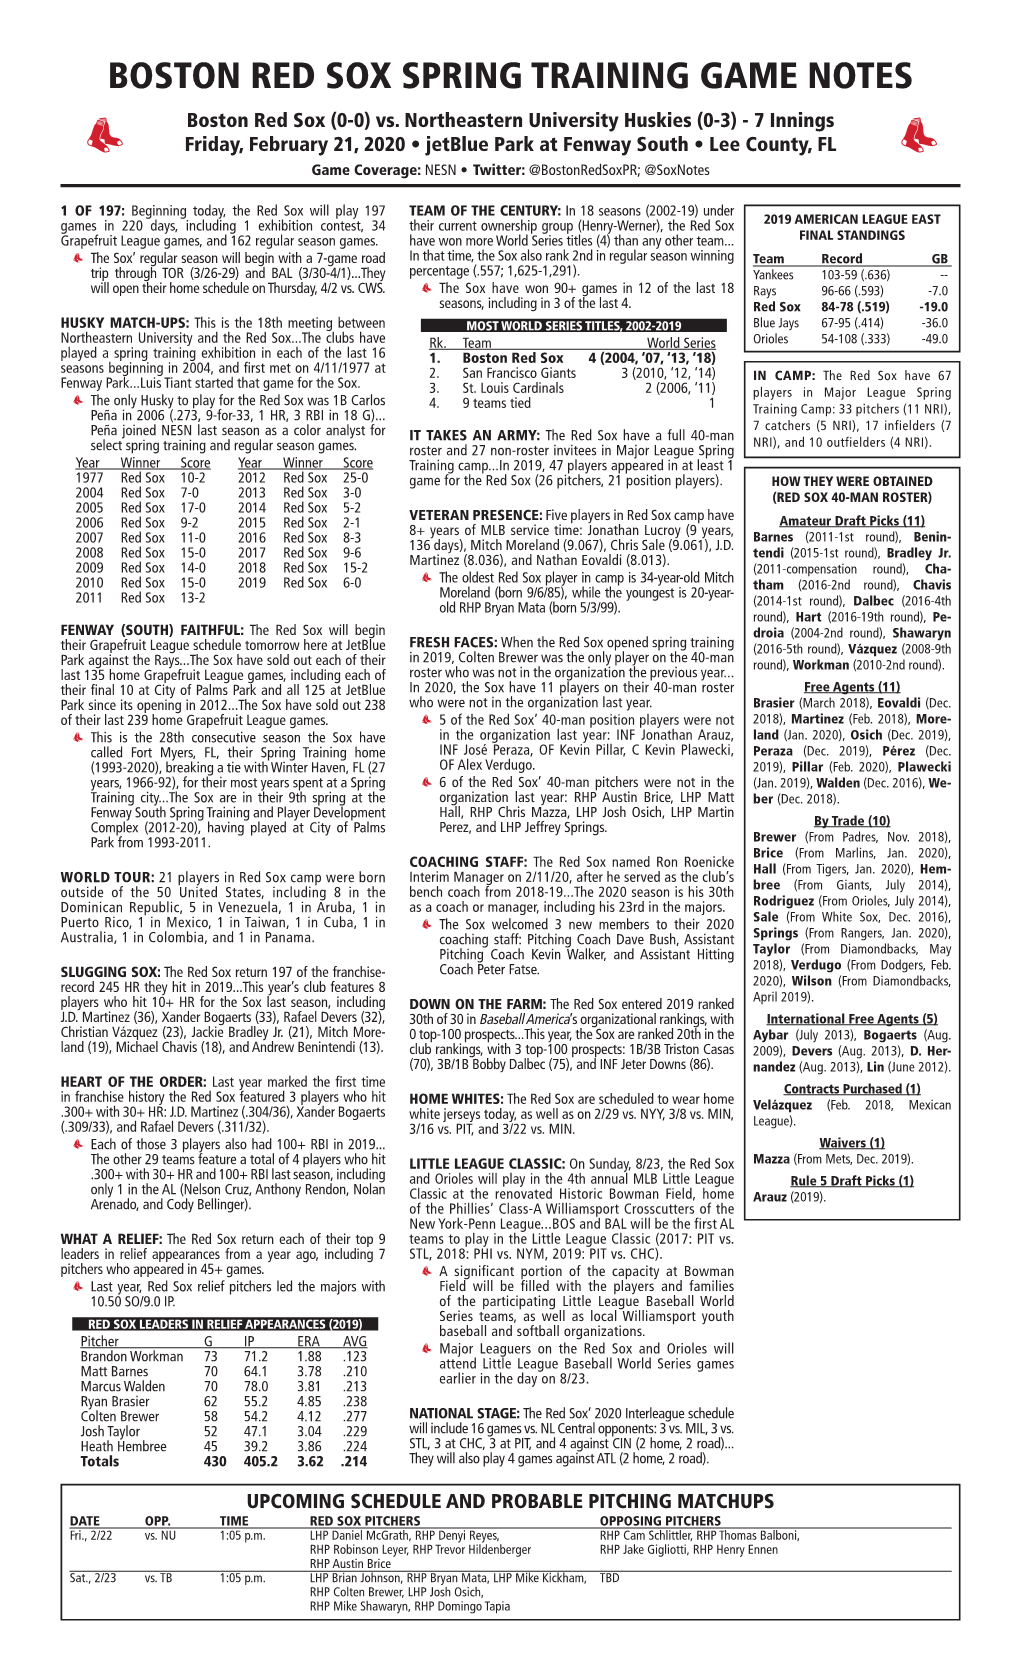 BOSTON RED SOX SPRING TRAINING GAME NOTES Boston Red Sox (0-0) Vs